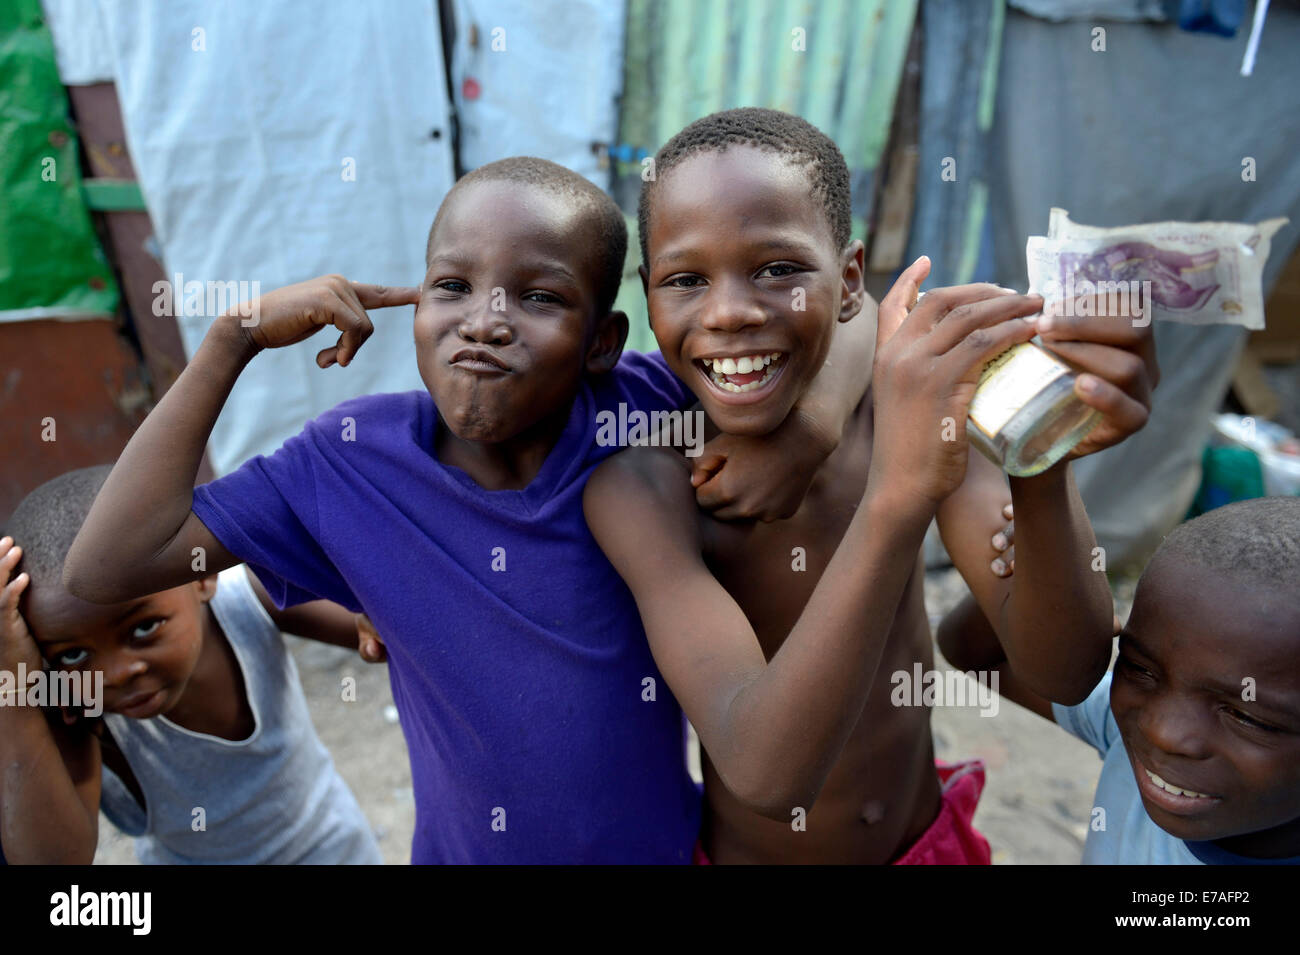 Two boys posing with money, alcohol and gesture of a gun, gestures for the criminal idols of the children, Camp Icare for Stock Photo